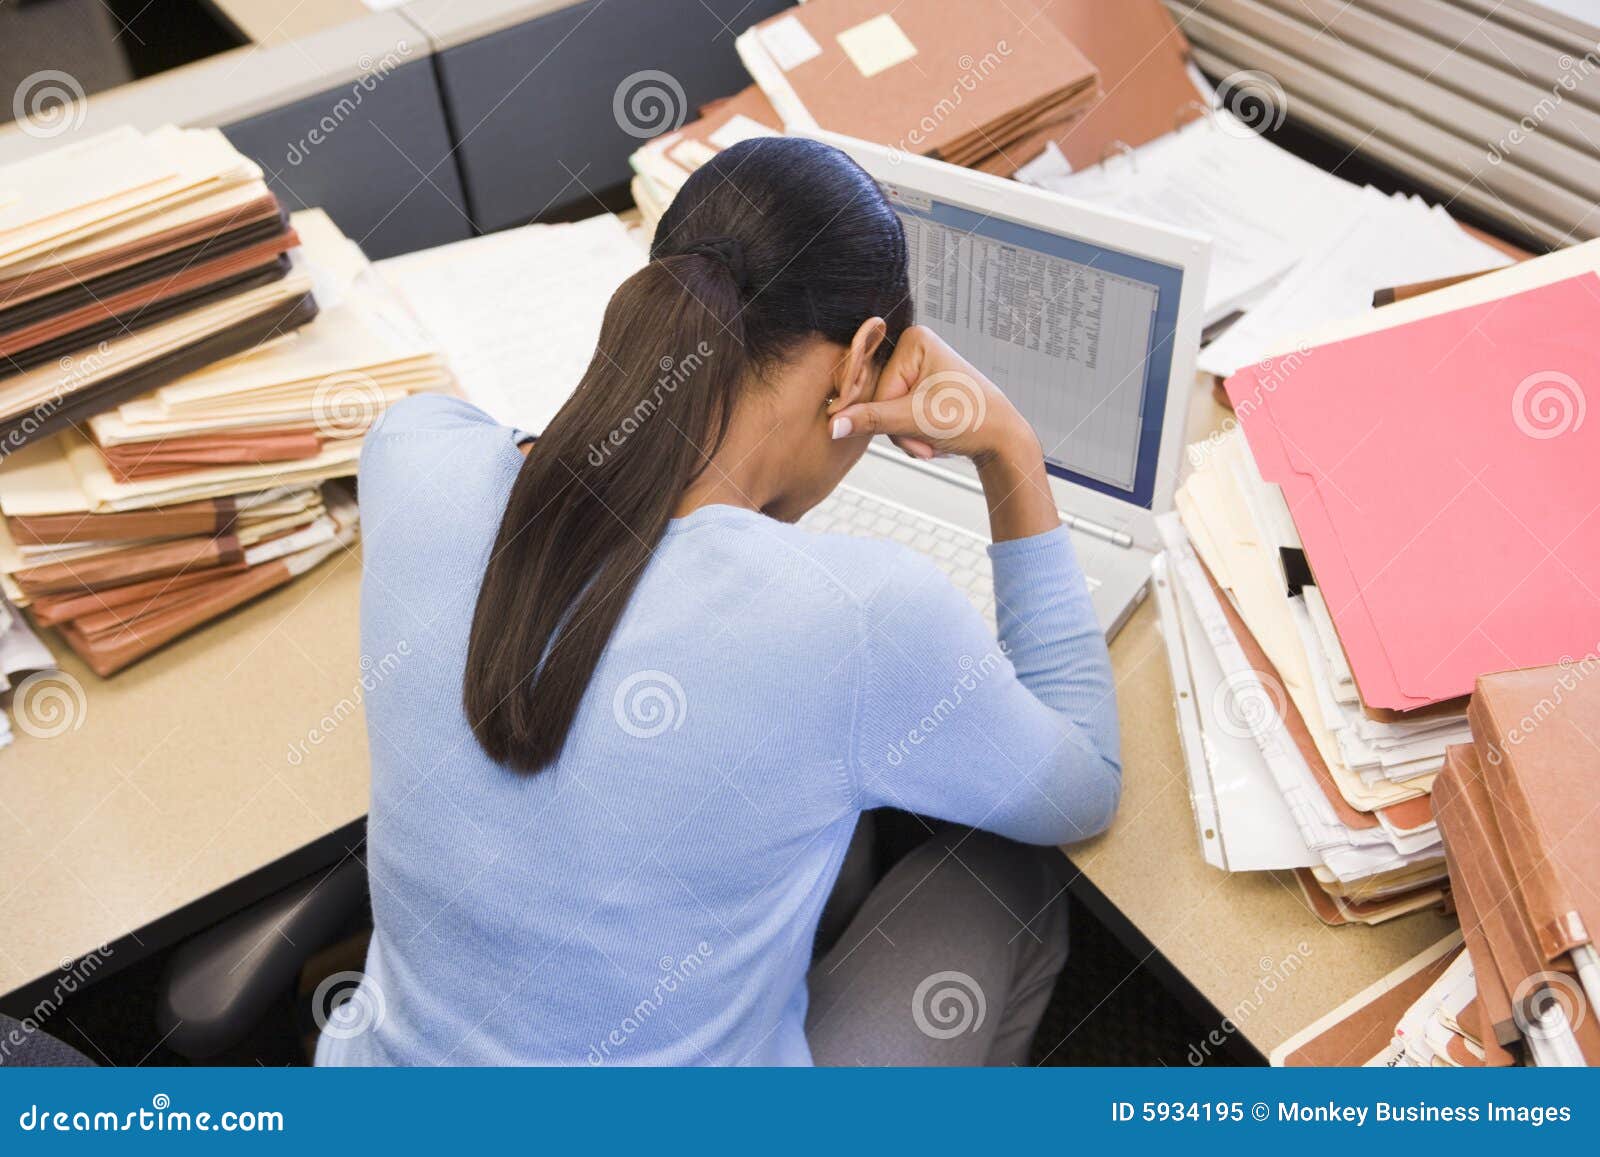 businesswoman in cubicle with laptop